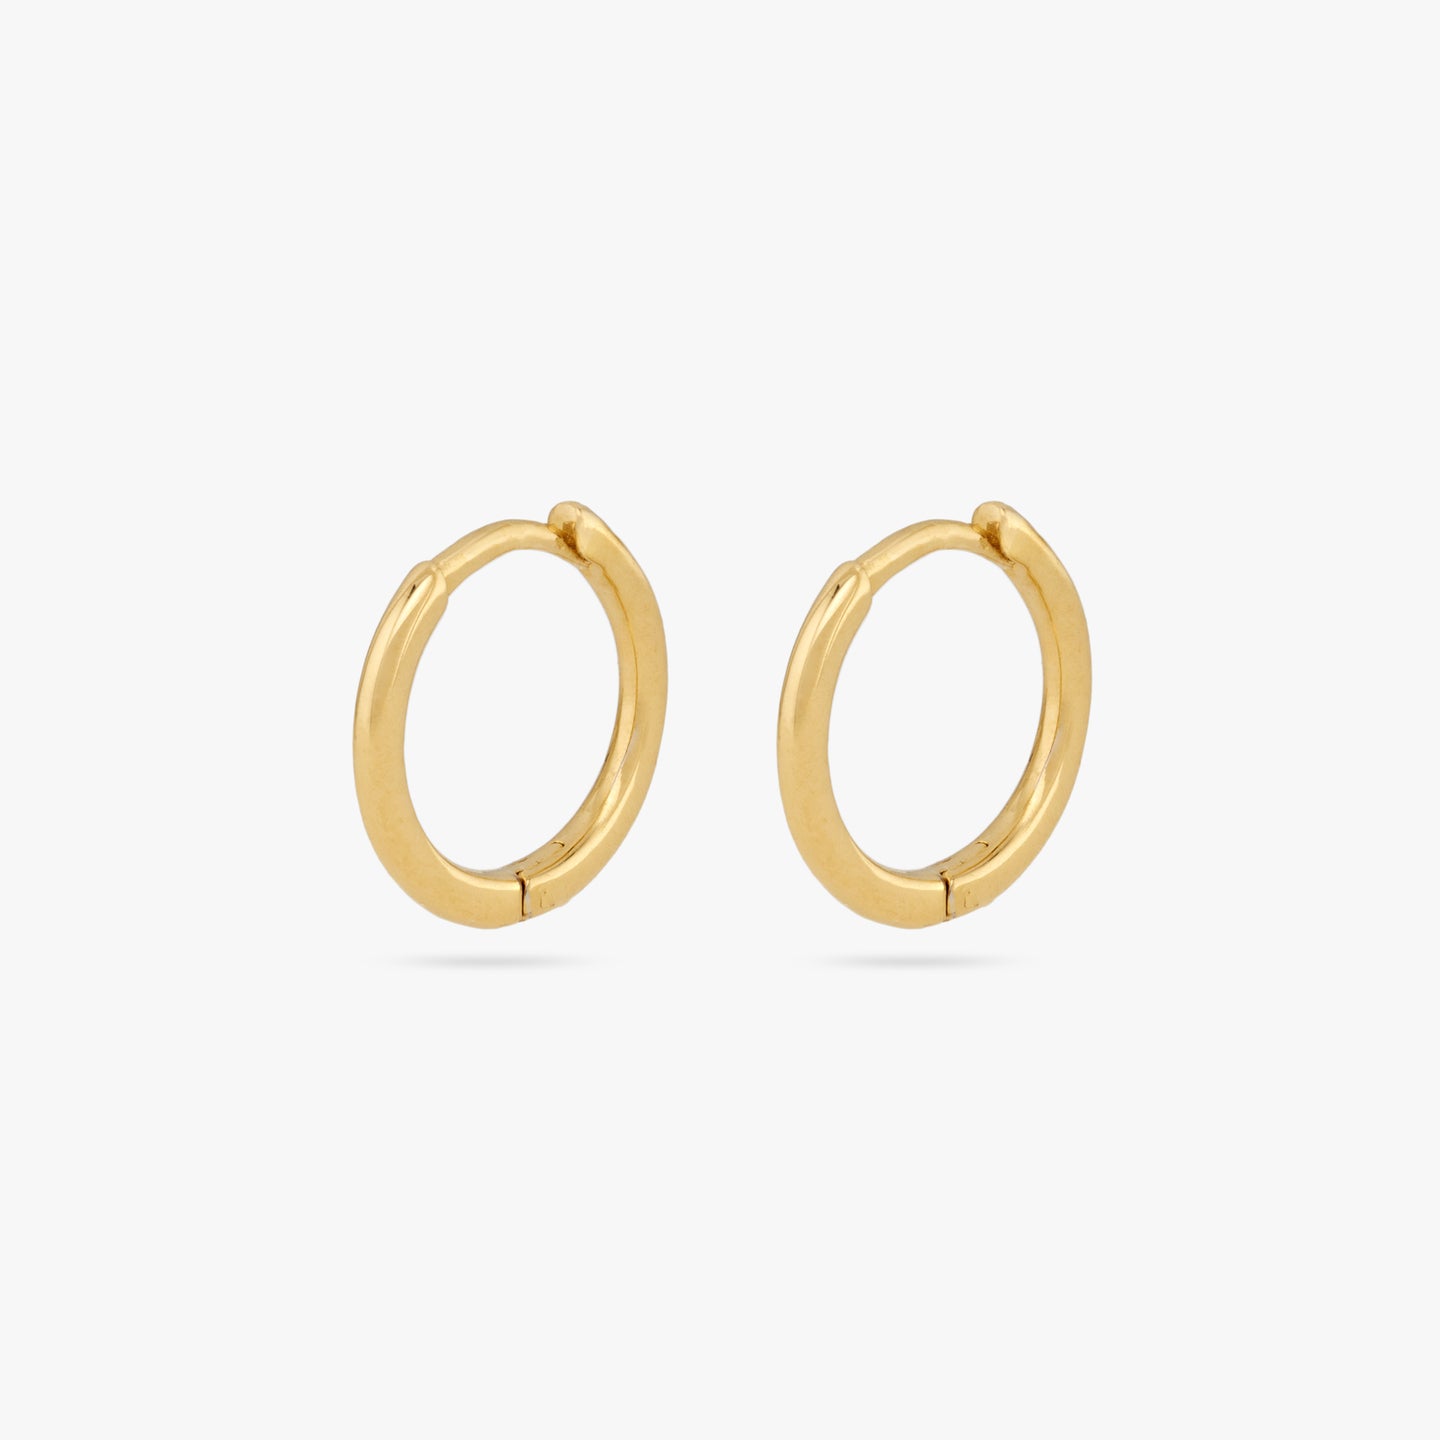 This is a pair of small gold huggies with square edges [pair] color:null|gold